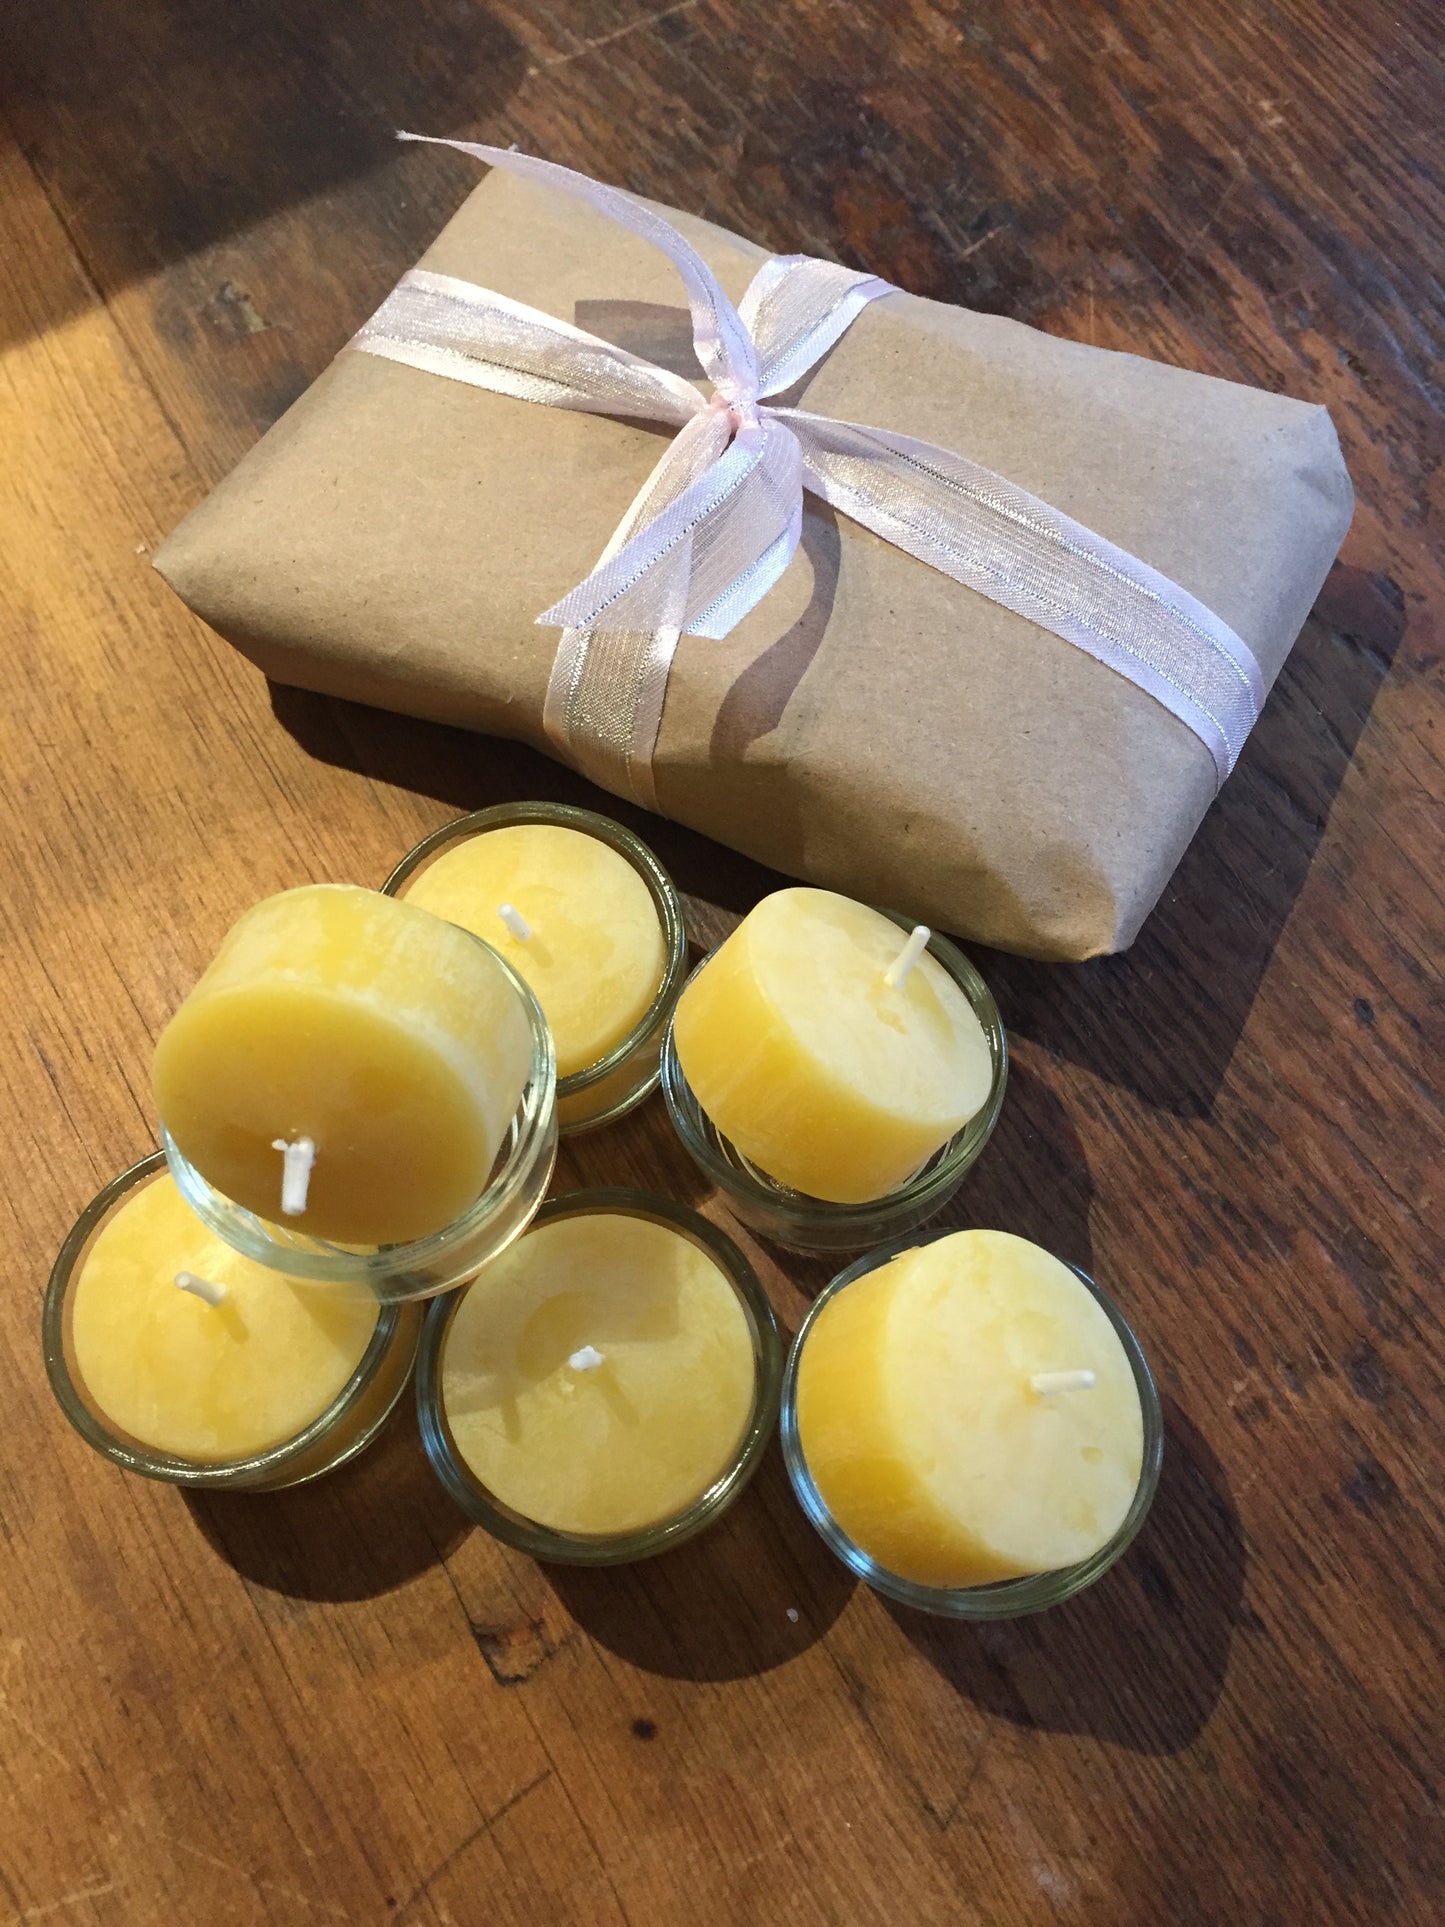 Beeswax Candles - 6 TEA LIGHTS IN GLASS CUPS